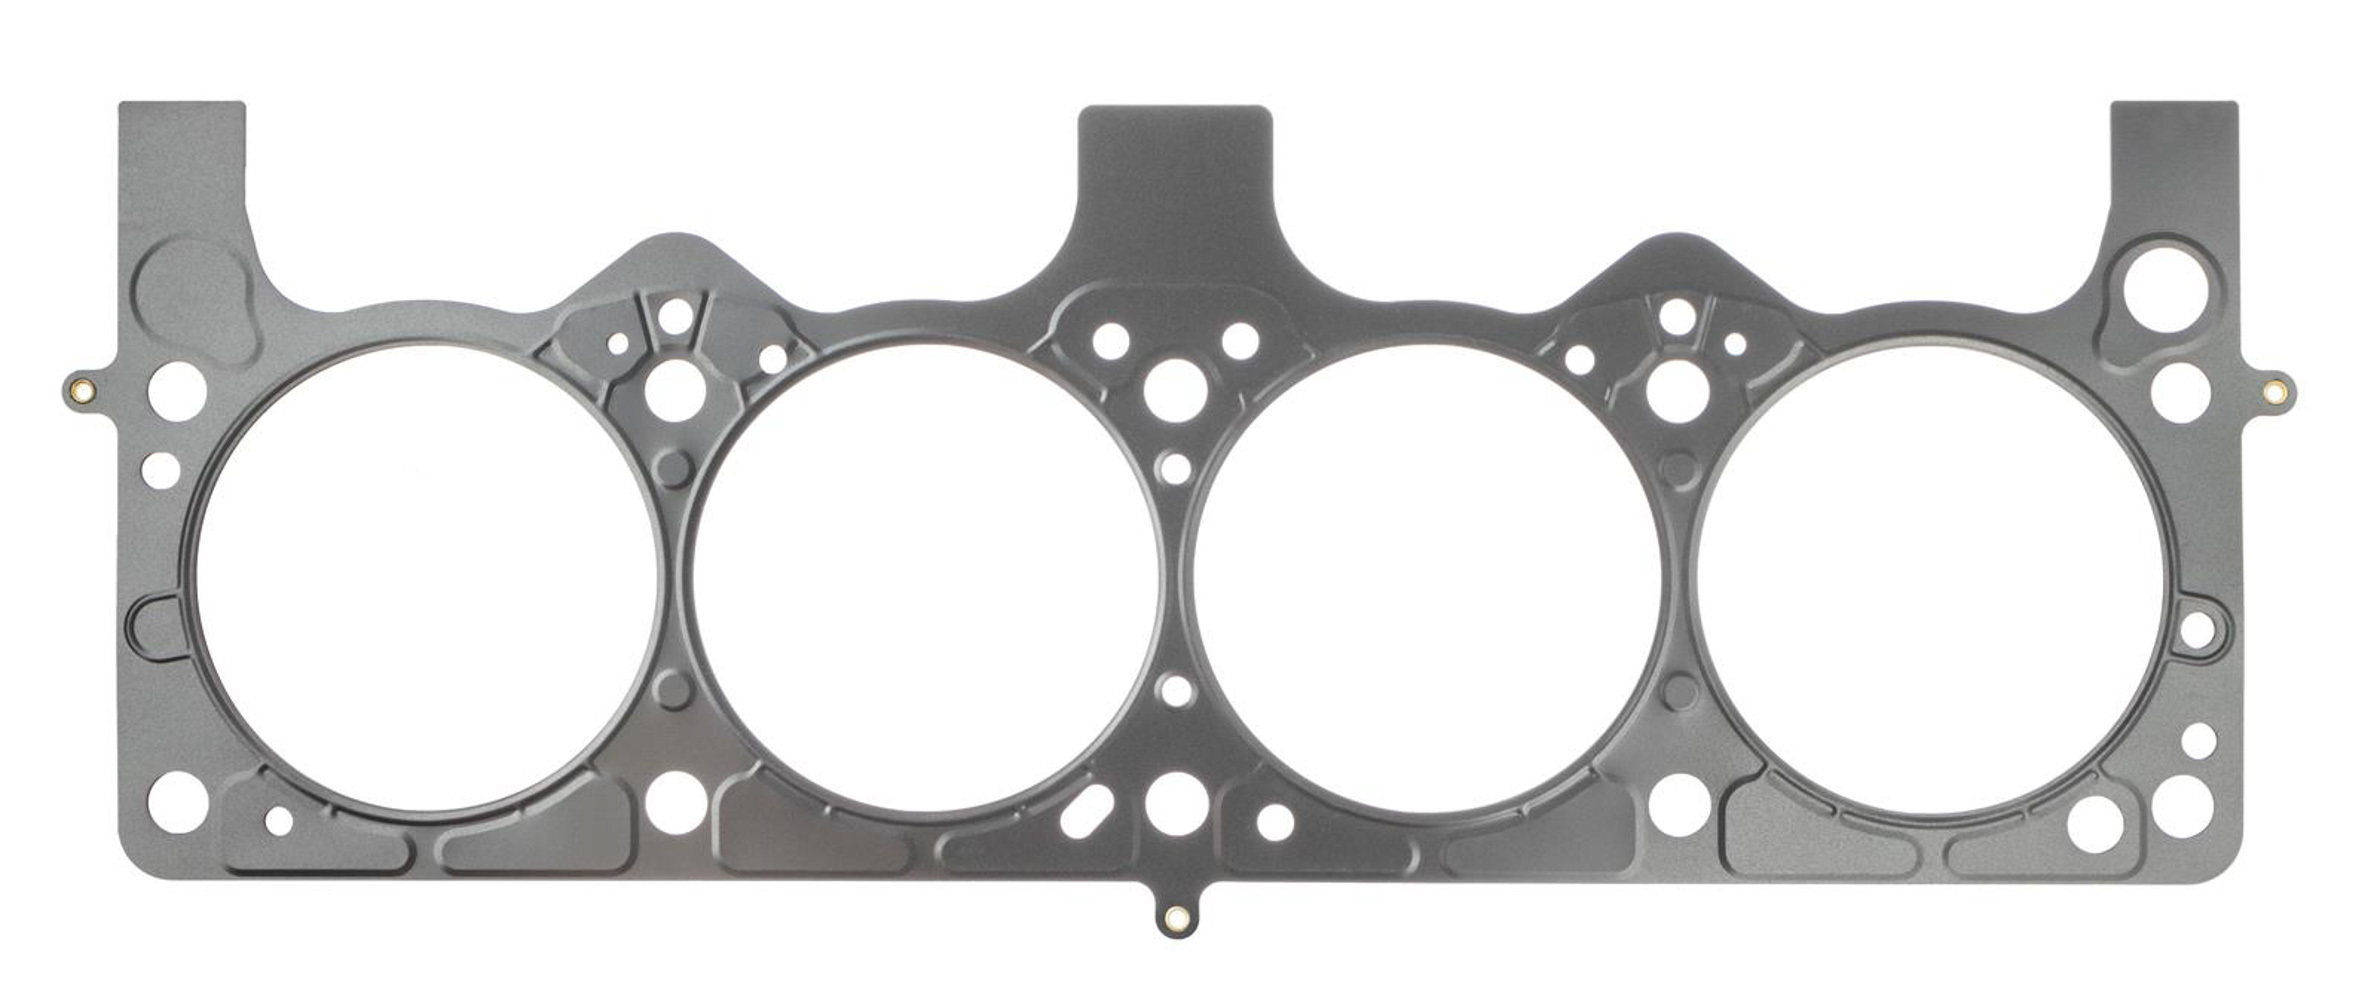 SCE Gaskets M691239 - Cylinder Head Gasket, MLS Spartan, 4.126 in Bore, 0.039 in Compression Thickness, Multi-Layer Steel, Small Block Mopar, Each